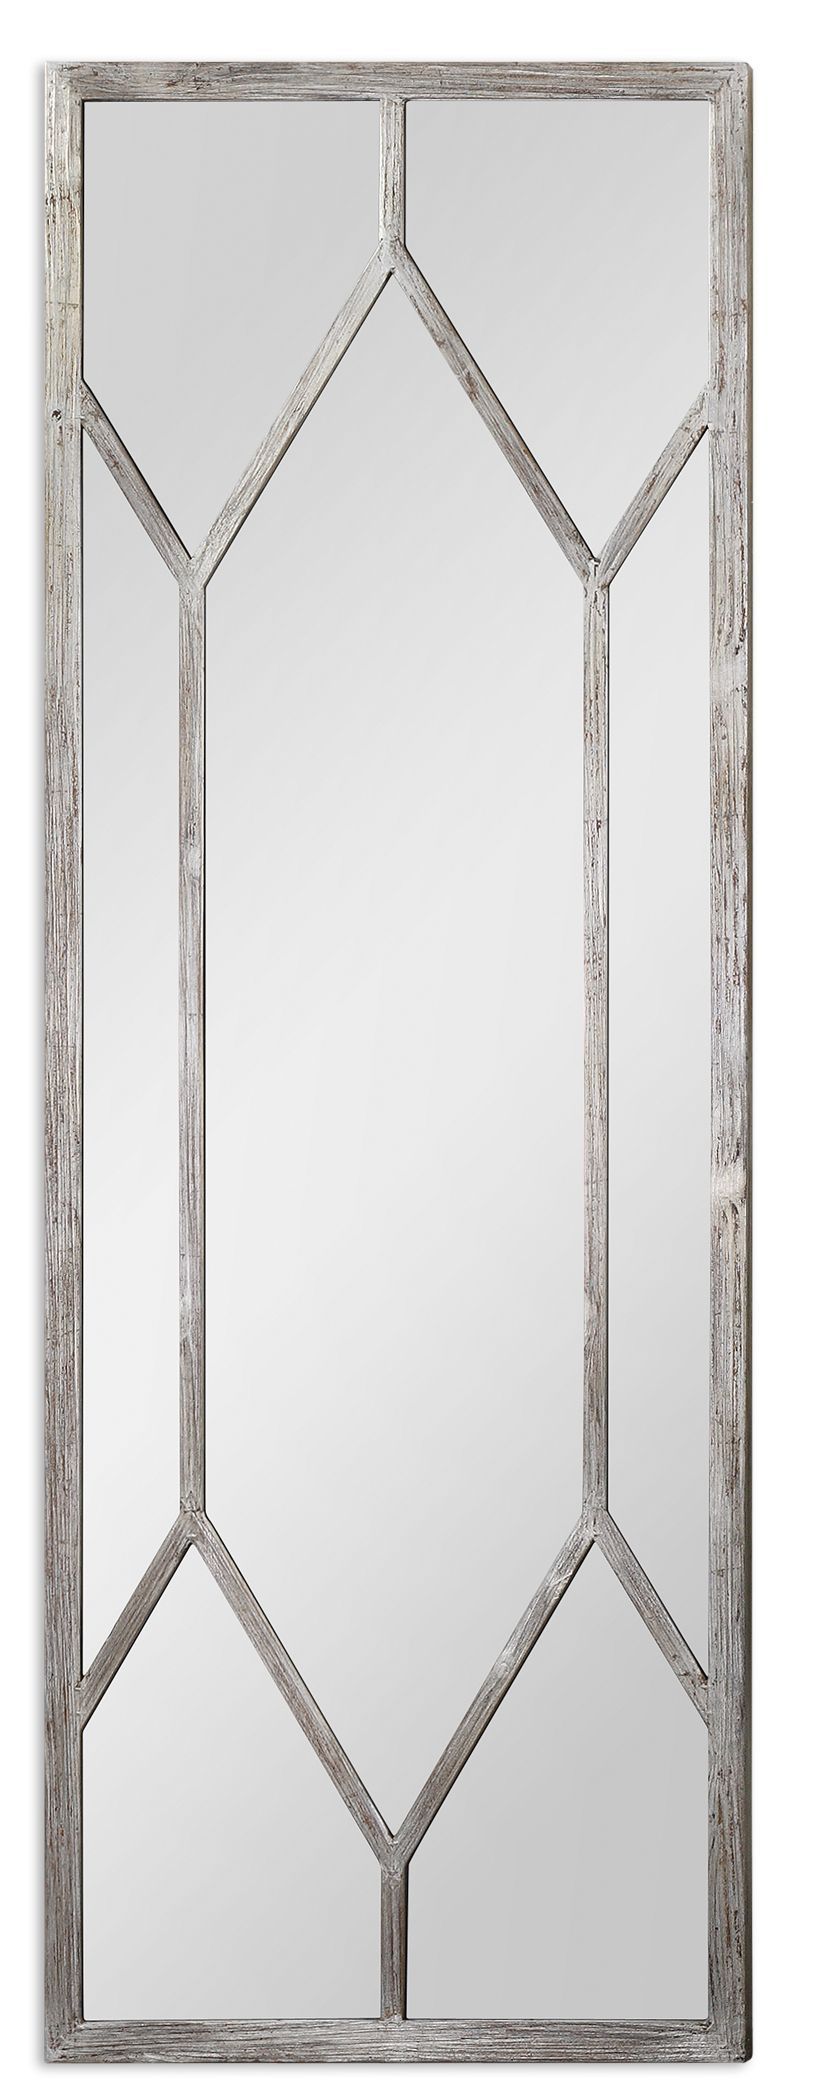 Oversized Champagne Silver Leaf Wall Floor Mirror Large 79'' Xl French For Gold Leaf Floor Mirrors (View 9 of 15)